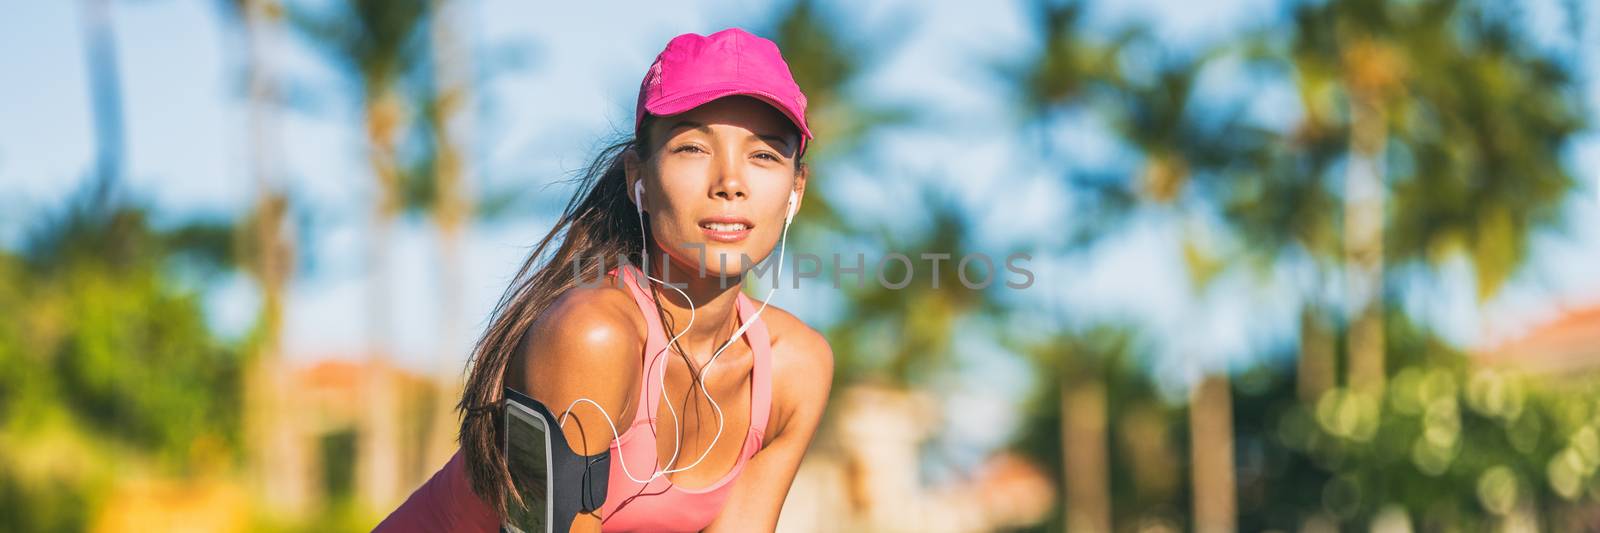 Tired runner woman running with sports cap and sport armband with earphones listening to mobile music. Active fit Asian girl resting taking a jogging break on outdoor summer lifestyle banner panorama.